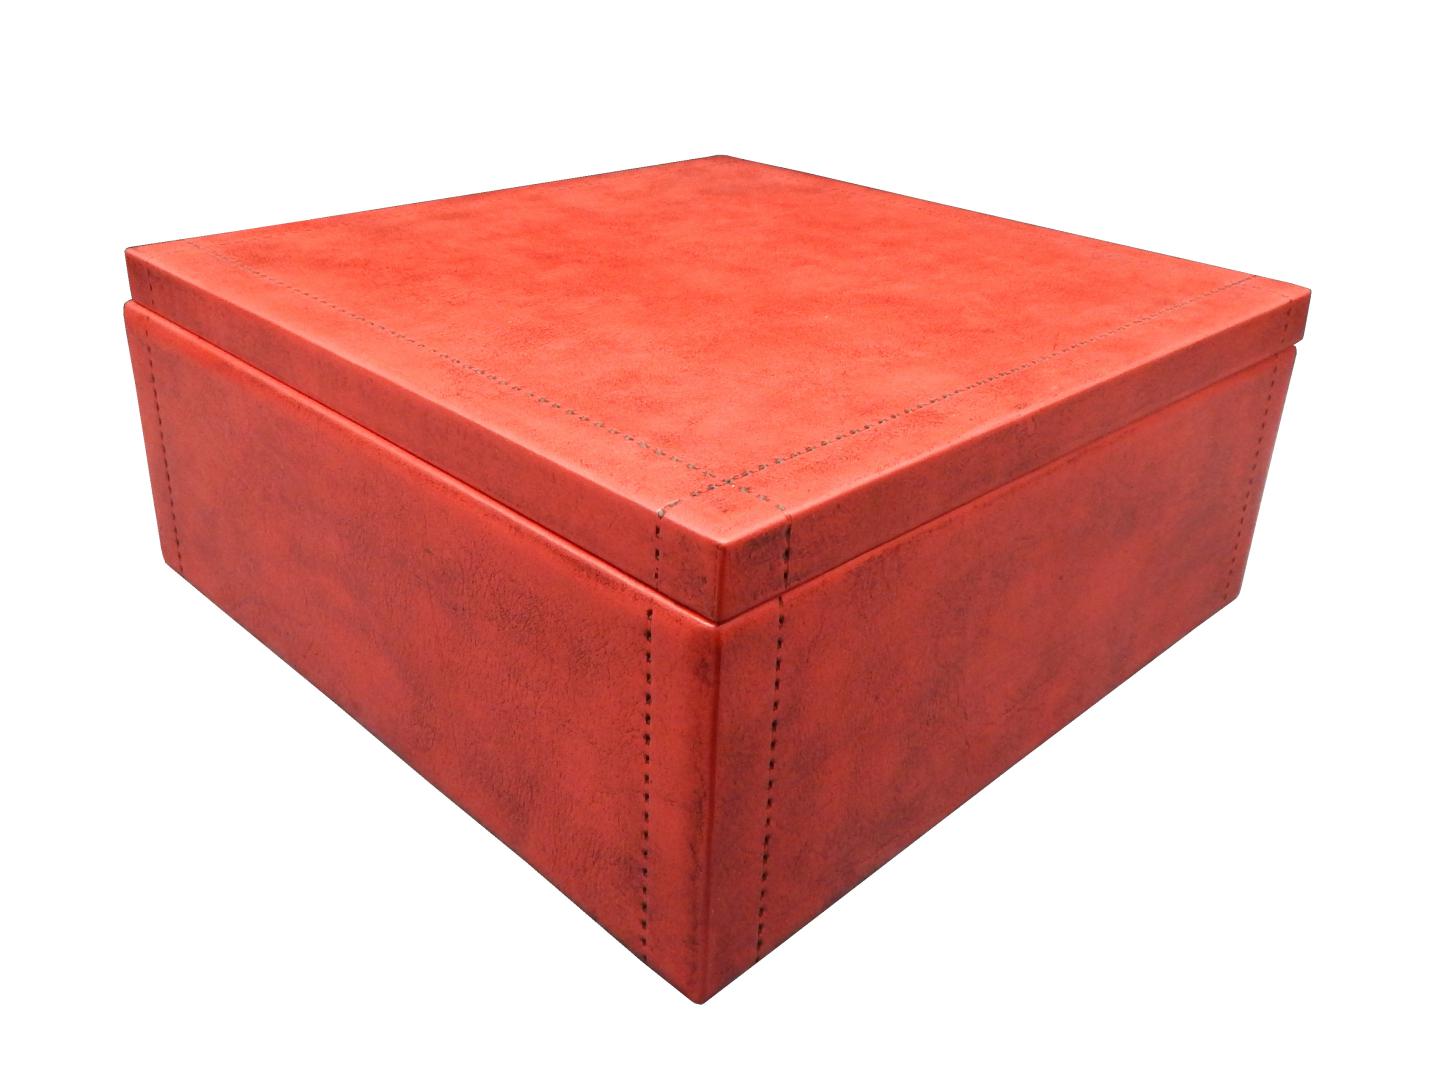 leather box with stitchless design on the sides and top of the box